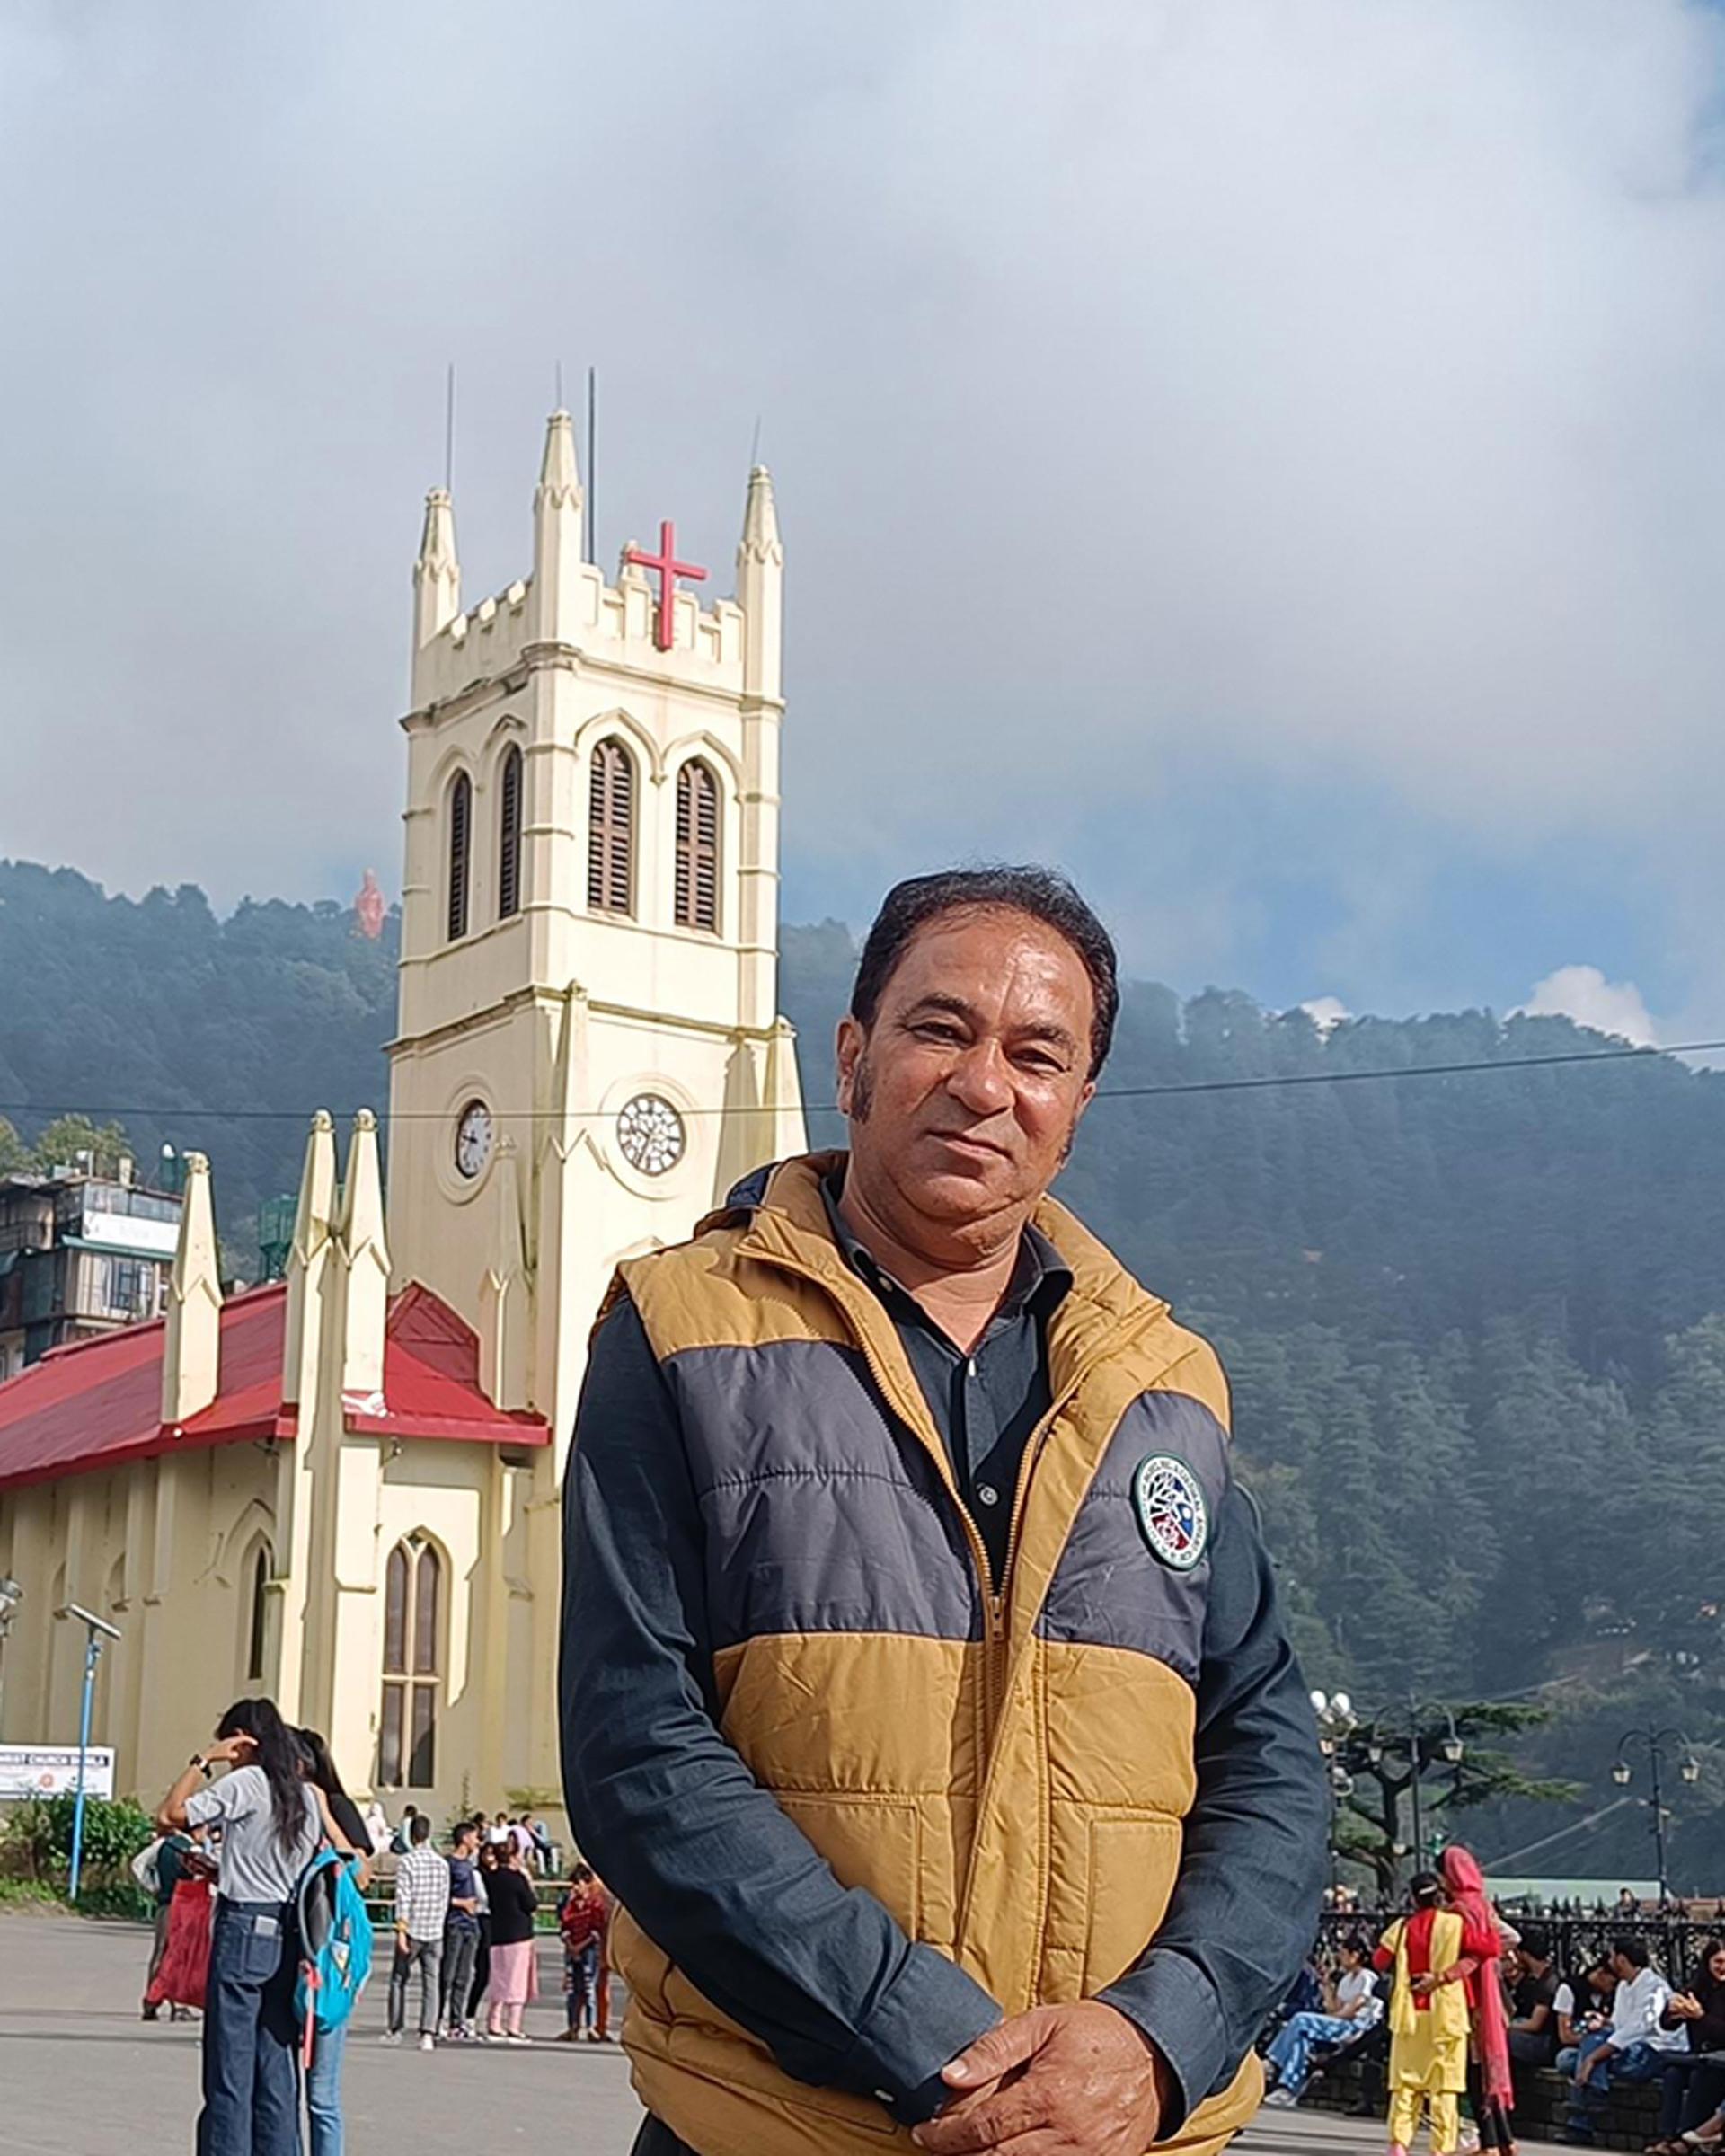 Sumit Raj is a Shimla native who conducts heritage walking tours in the city